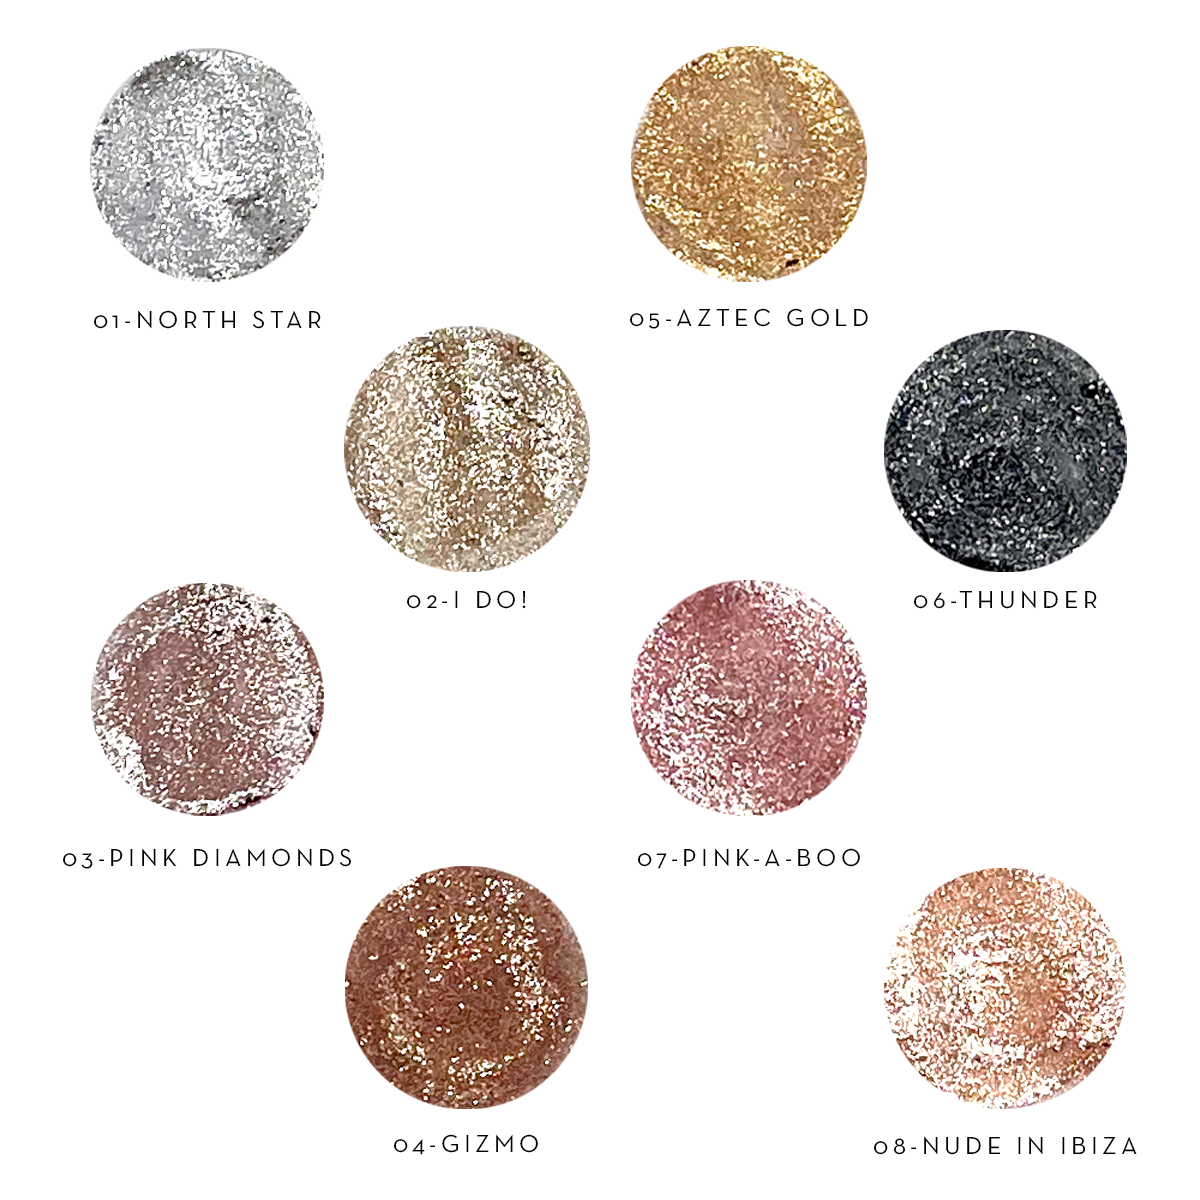 SWATCHES_71b85a2c-5cd0-46d3-9eed-0f9b145f5432.png